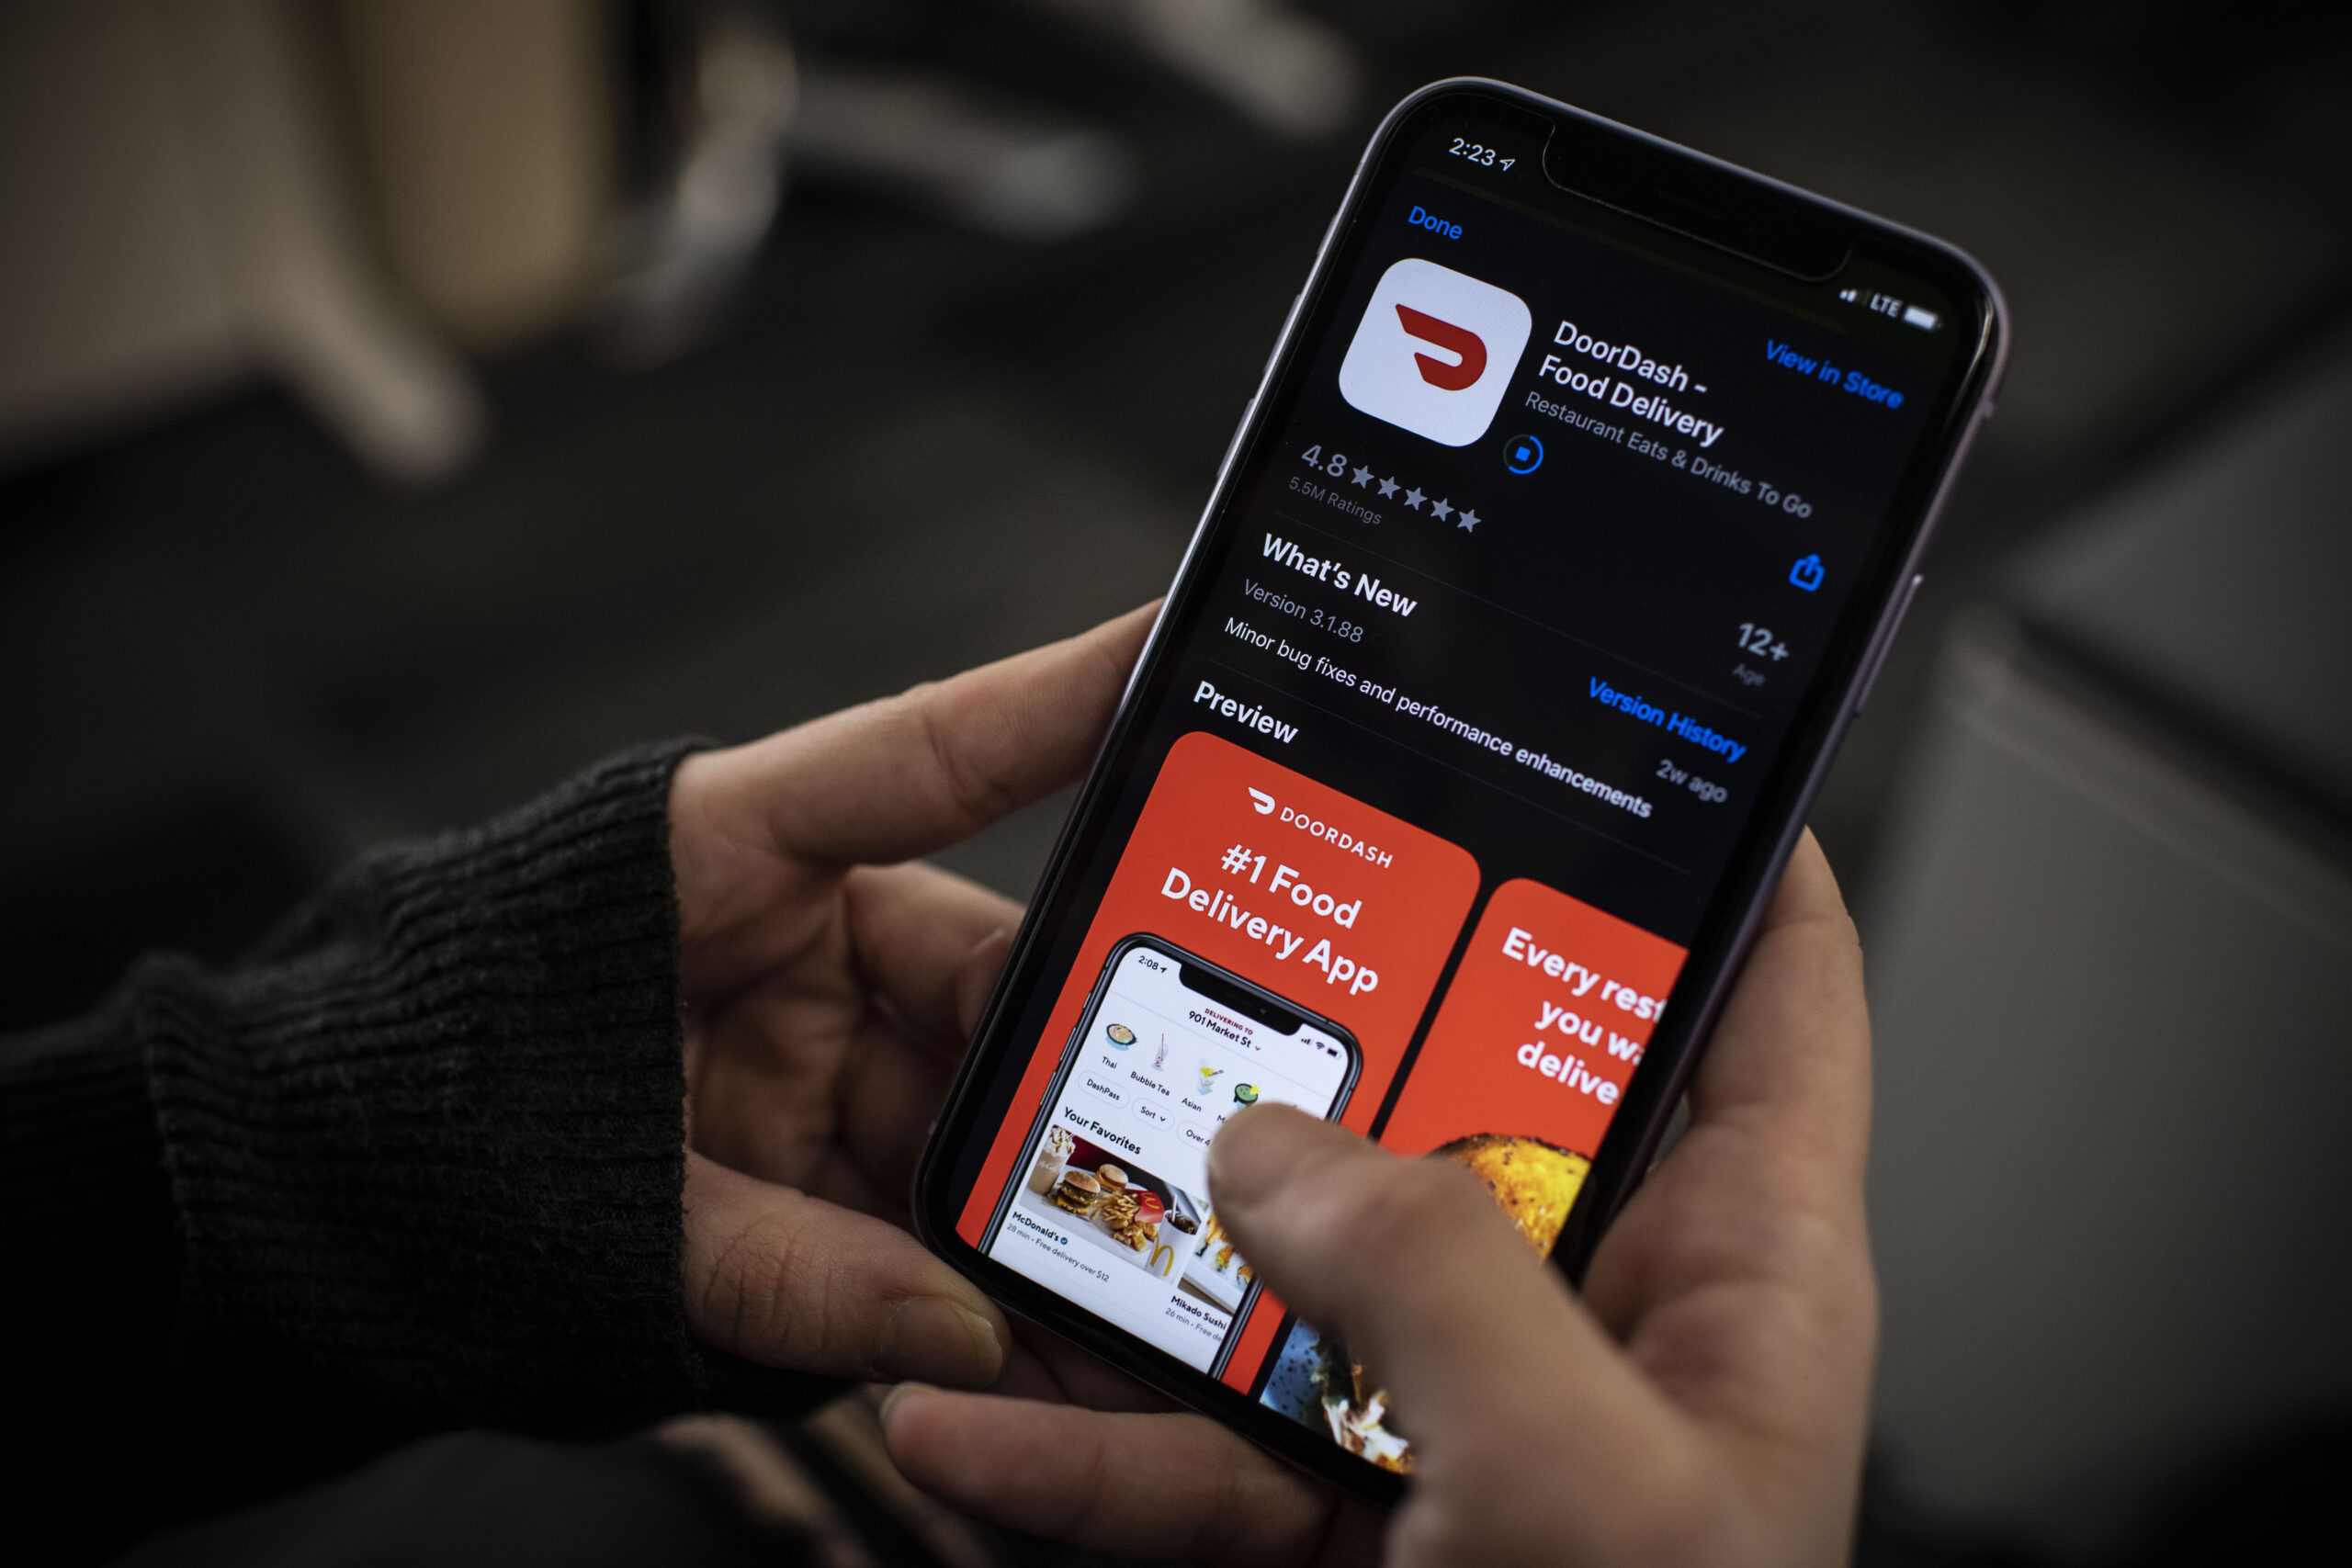 A user accesses the DoorDash app on their mobile phone.